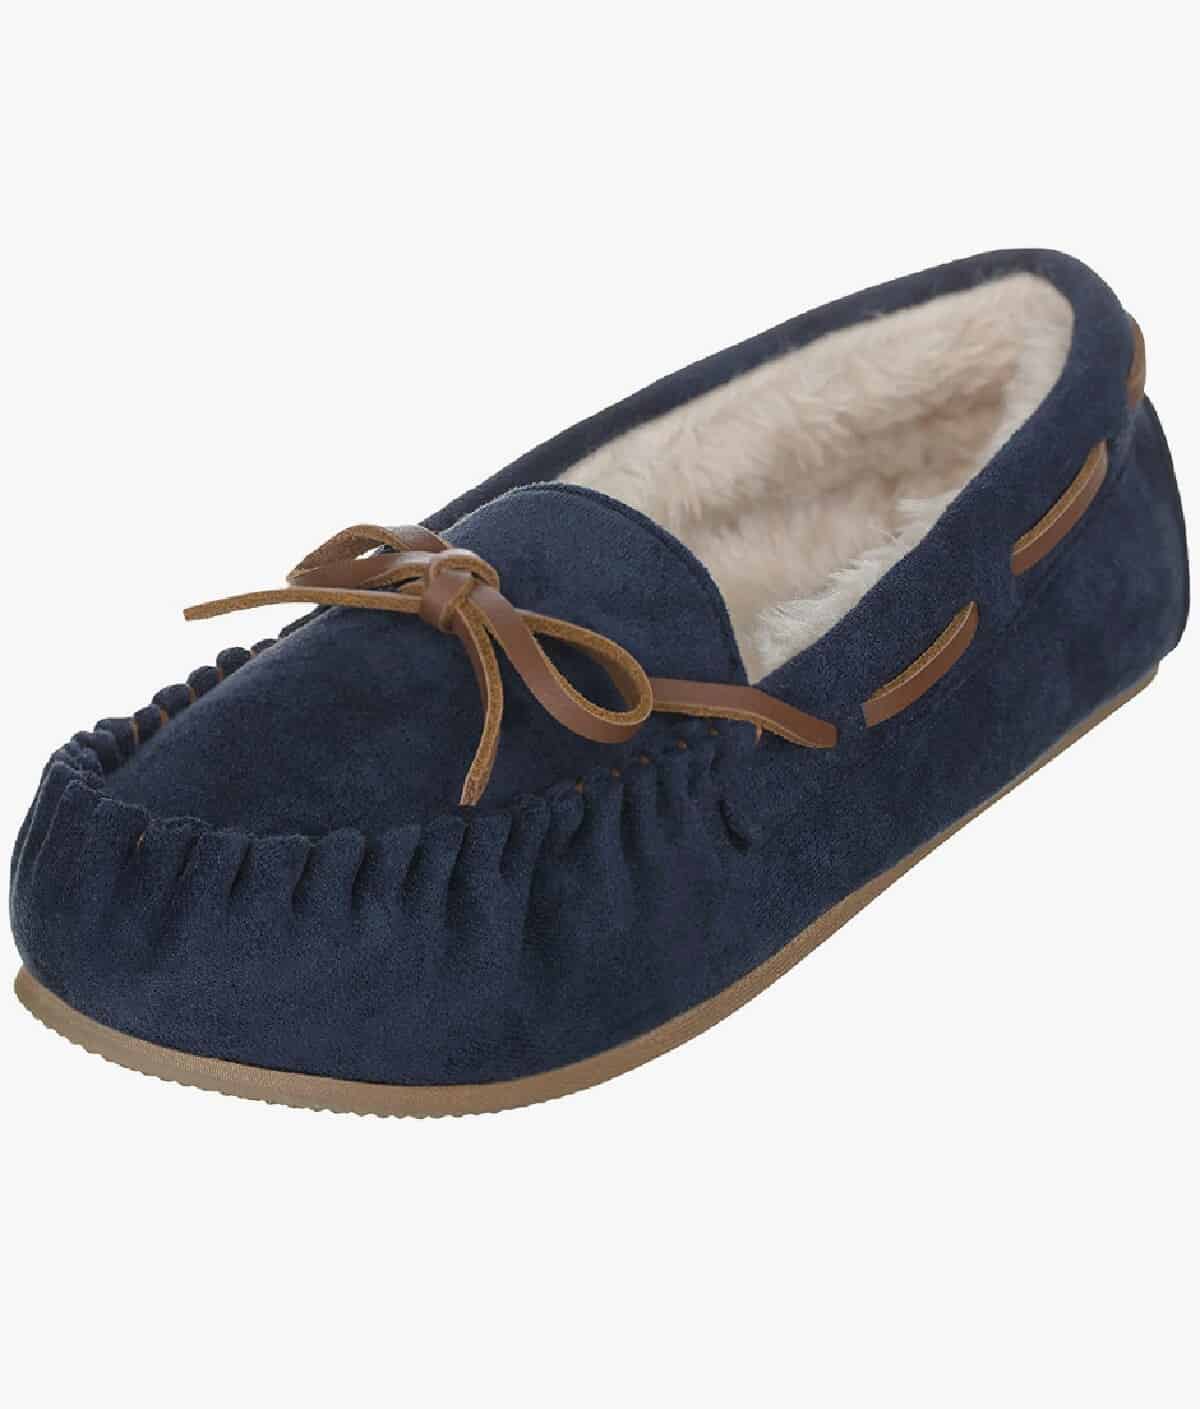 A single moccasin-style slipper in vegan suede and faux fur in navy blue by the brand, Illude.